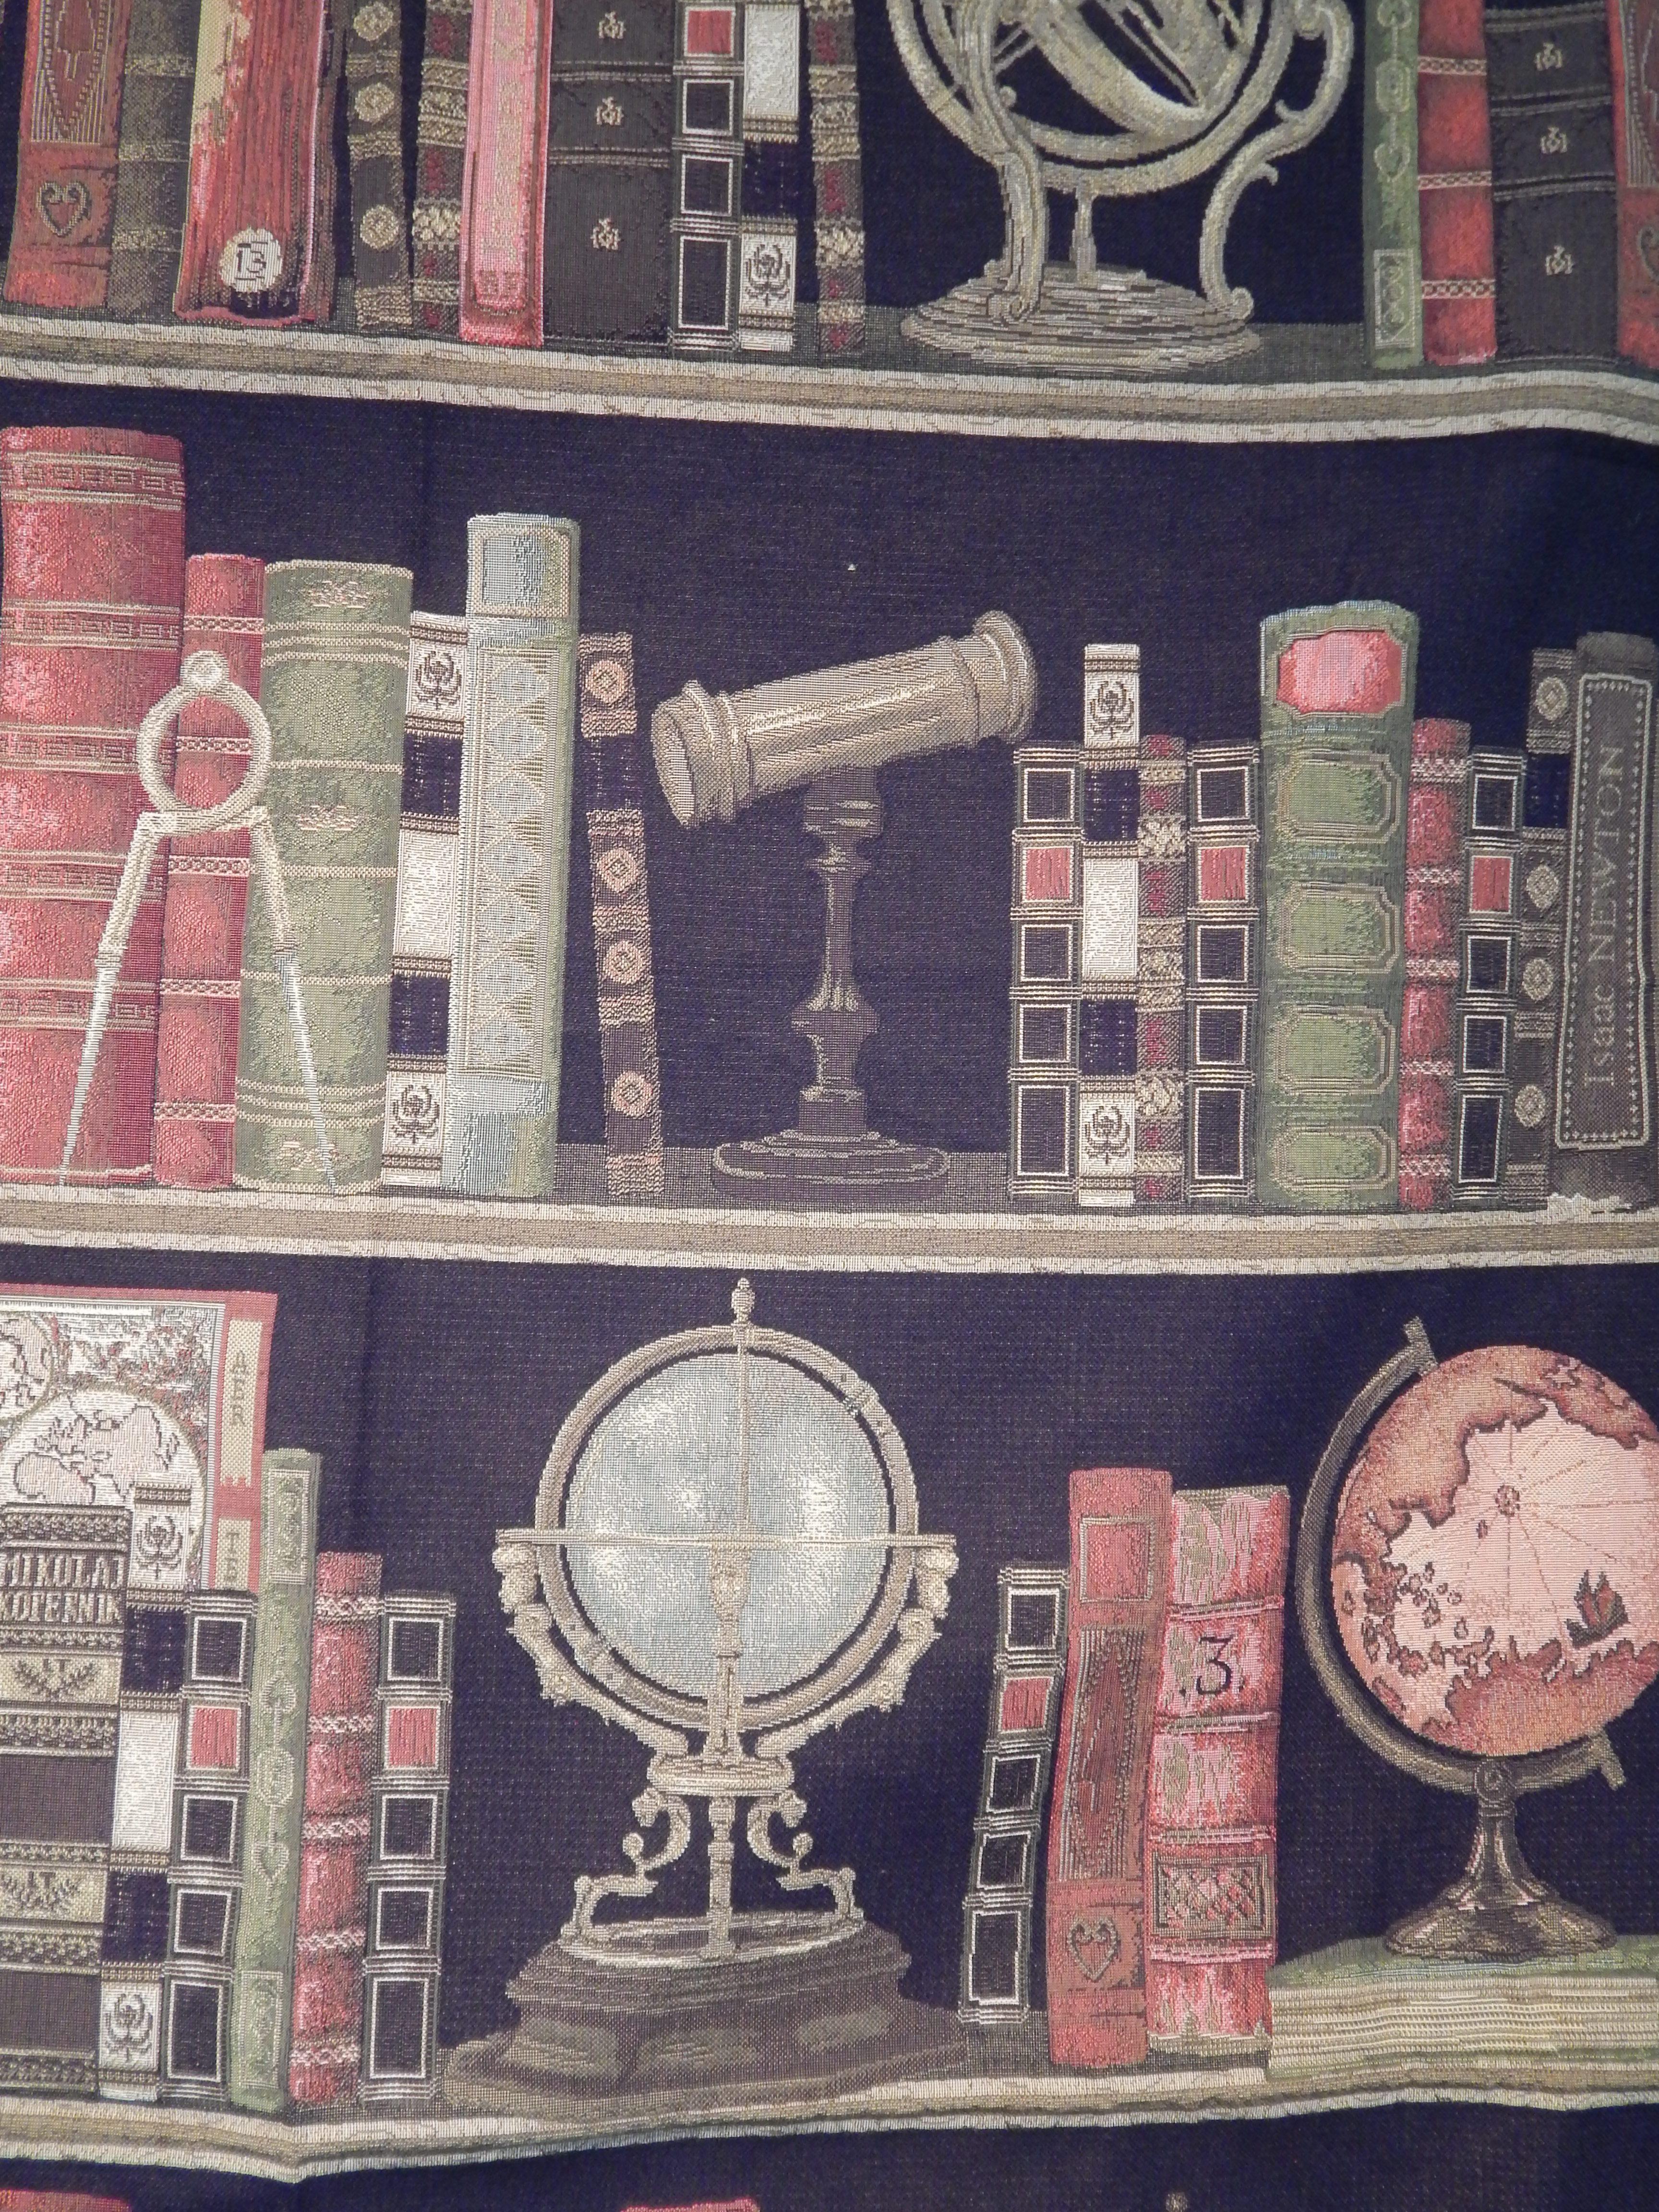 20th Century Tapestry with Globes, Hourglasses, Clocks and Booksh (Ende des 20. Jahrhunderts) im Angebot